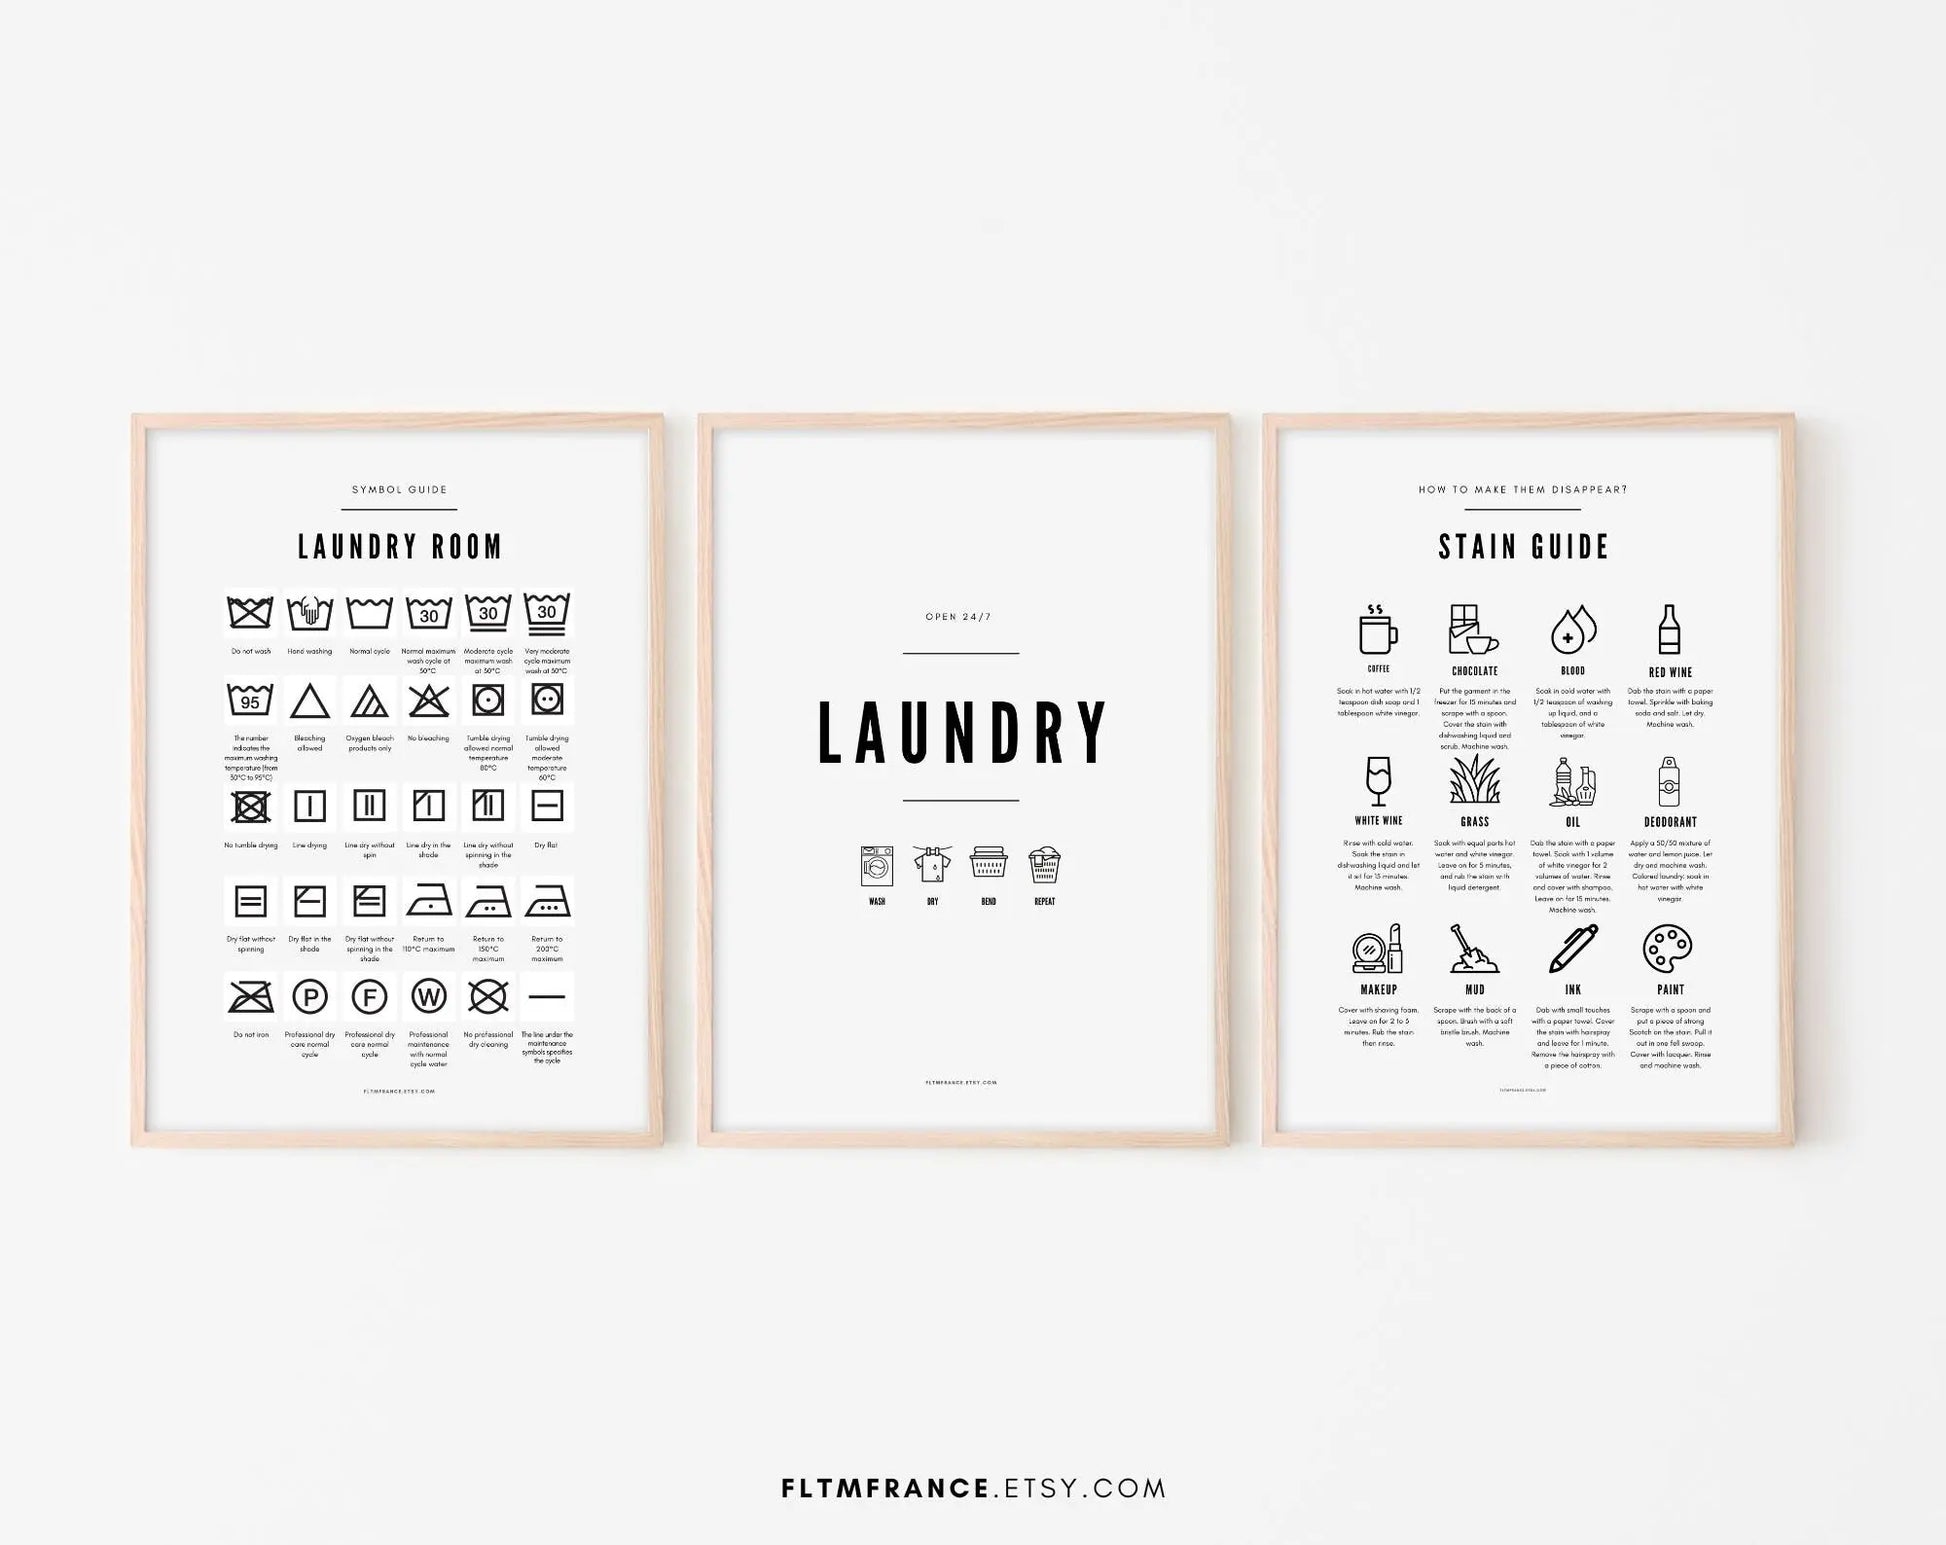 Set of 3 Posters Laundry, Laundry Room and Stain Guide - Laundry Symbols Guide Poster - Wall art printable poster - Laundry Wall Decor - FLTMfrance